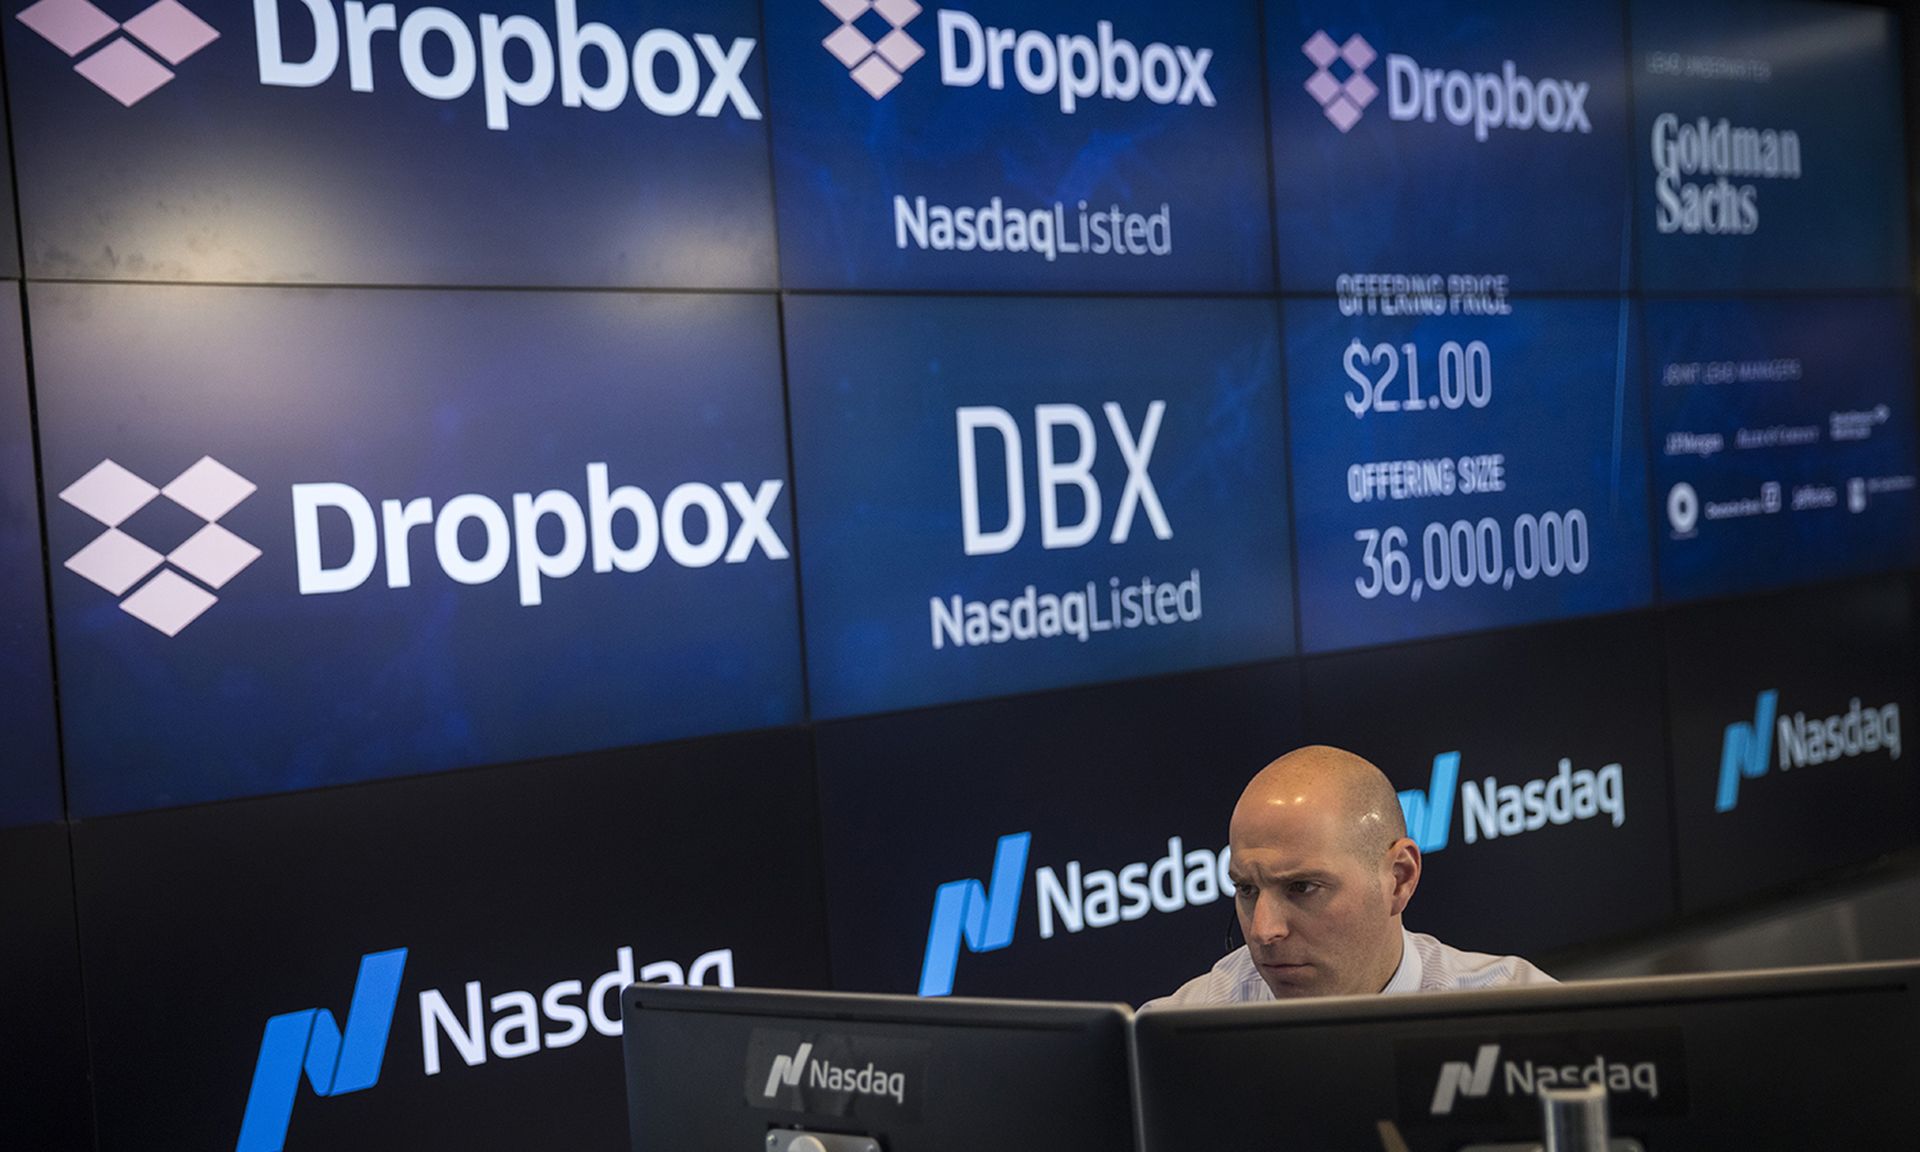 A Nasdaq official in New York City monitors a computer screen as trading starts on cloud storage provider DropBox in 2018. (Photo by Drew Angerer/Getty Images)